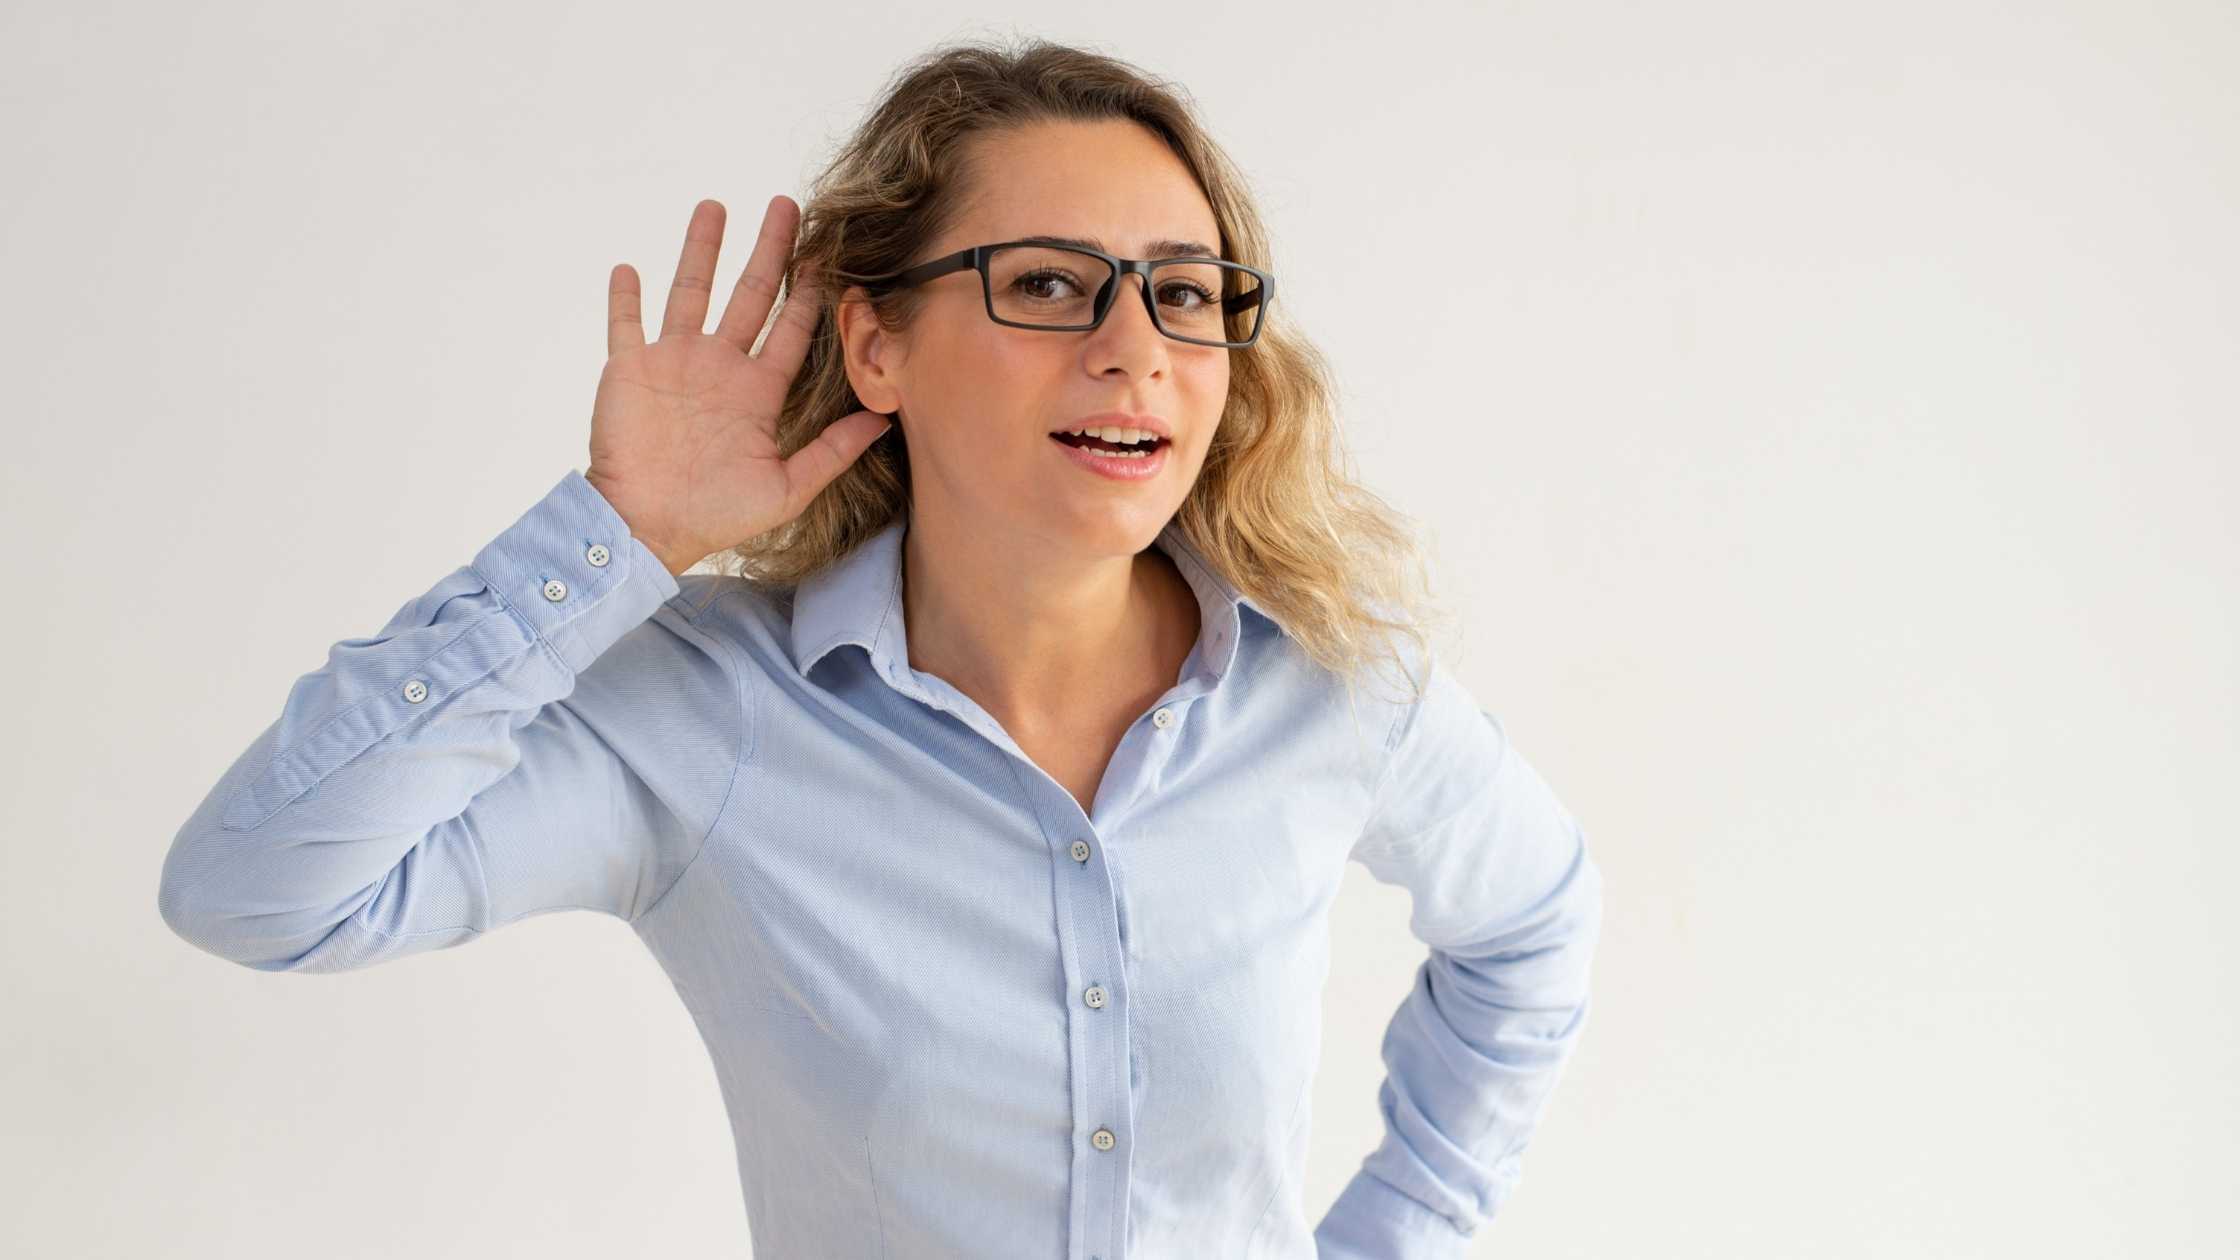 Young woman wearing glasses and a blue shirt holding hand to her ear against a grey background